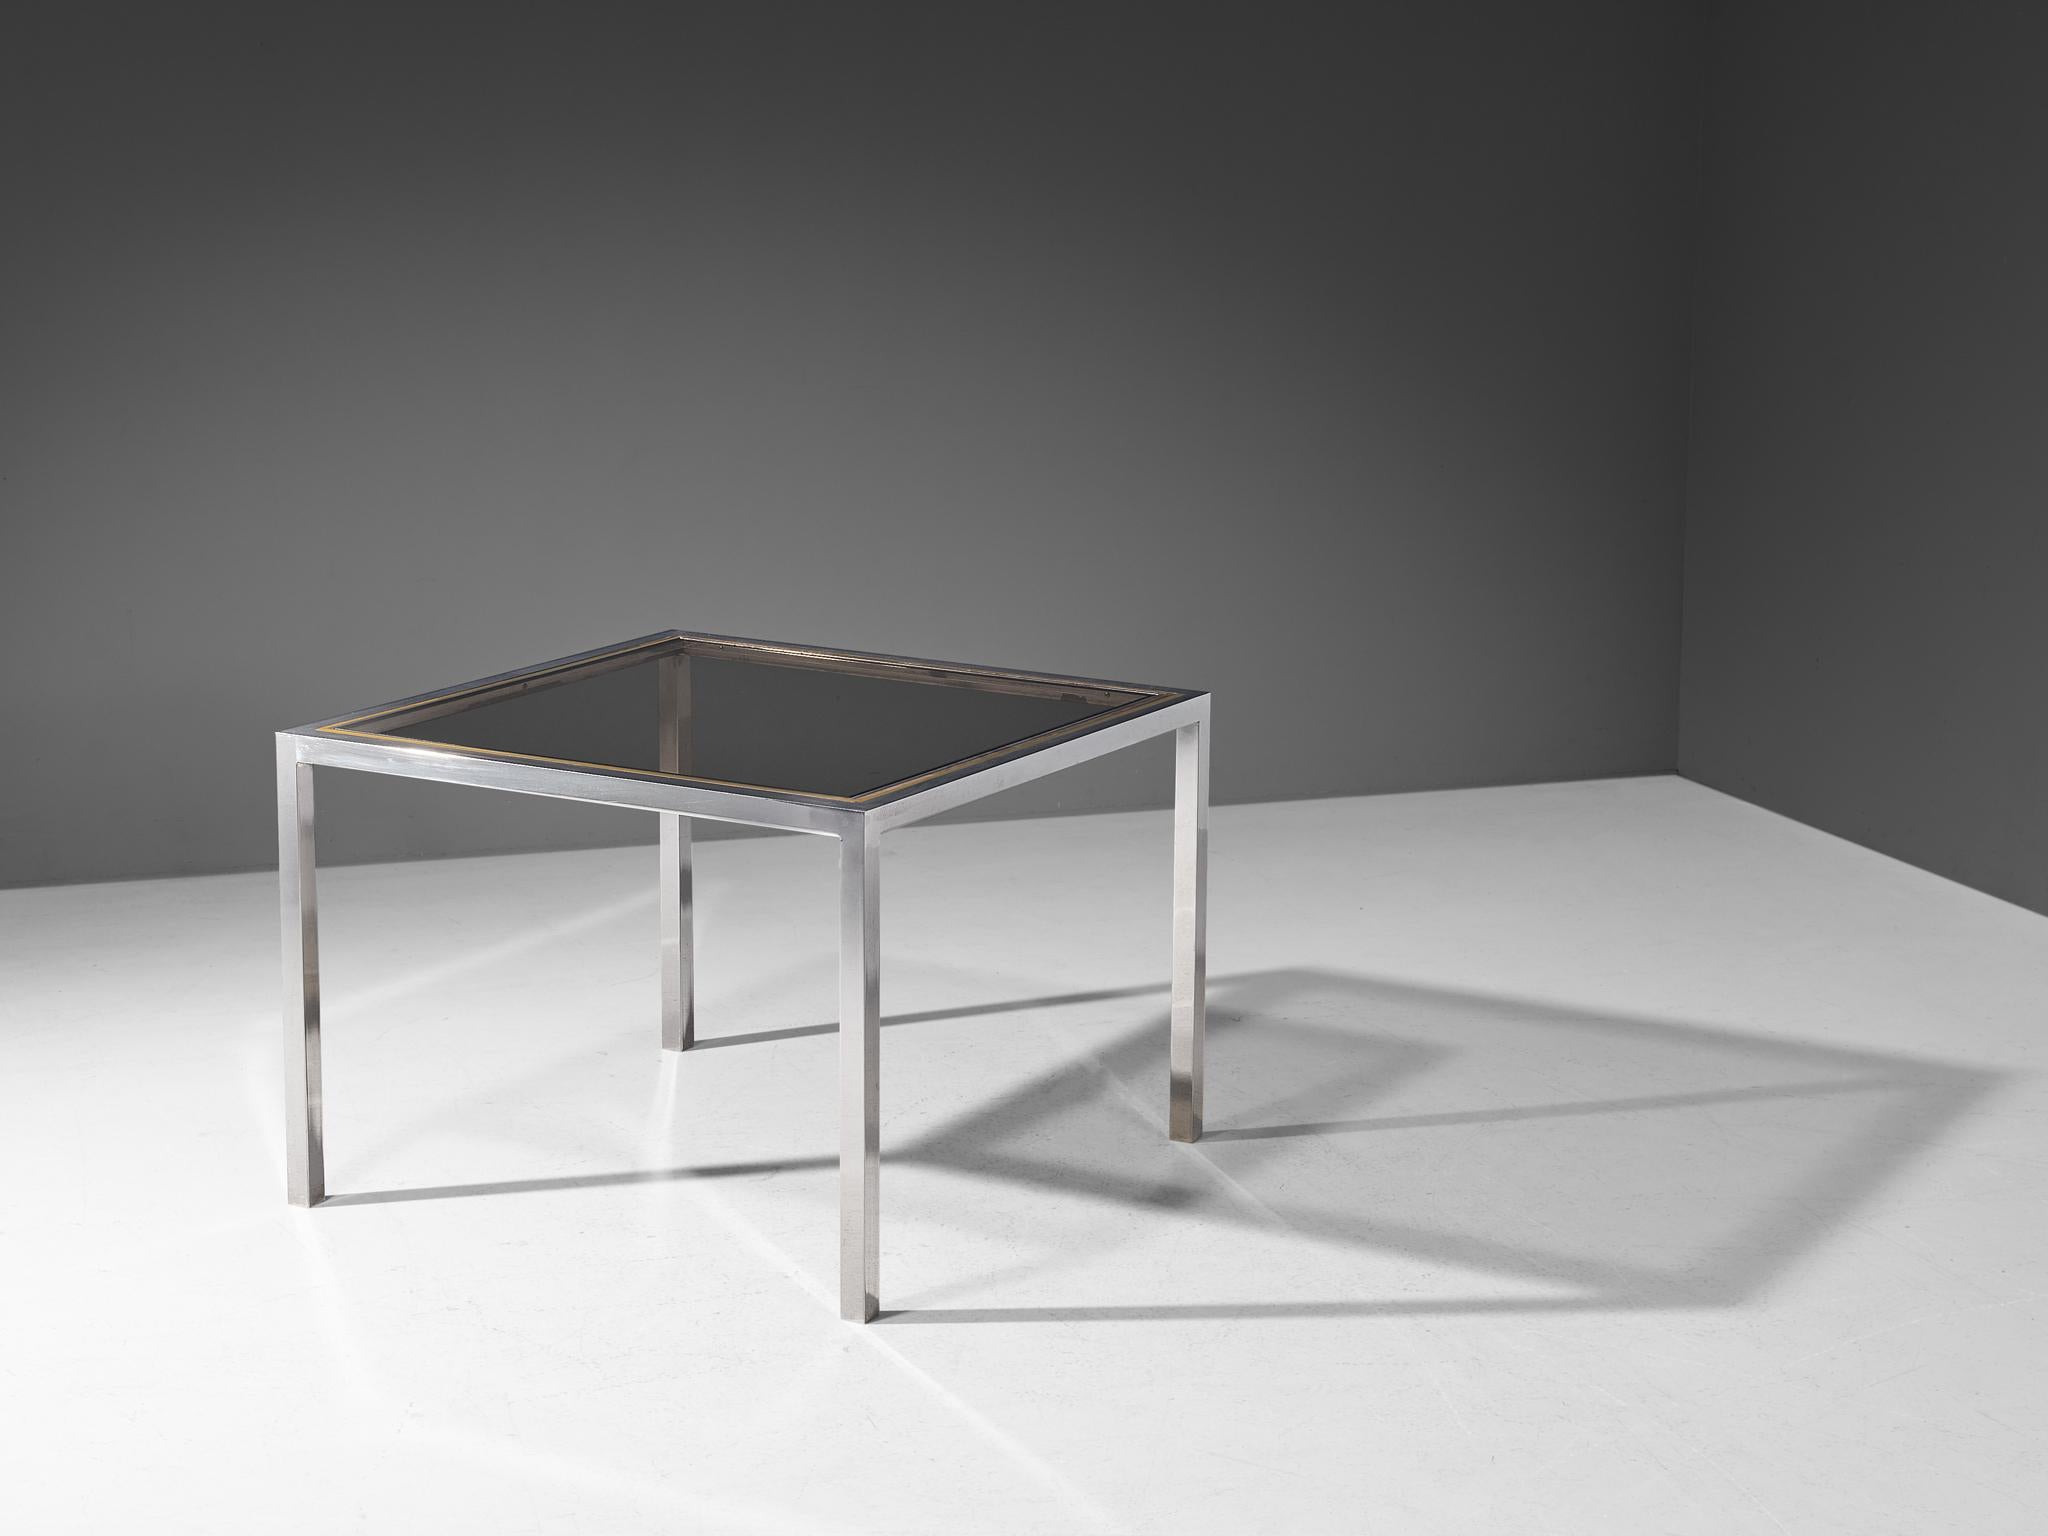 Dining table, brass, chromed steel, smoked glass, Italy, 1970s

This dining table features a geometric, clear-lined frame top in smoked glass and is surrounded by a brass border and further supported by a chromed steel base. The combination of these